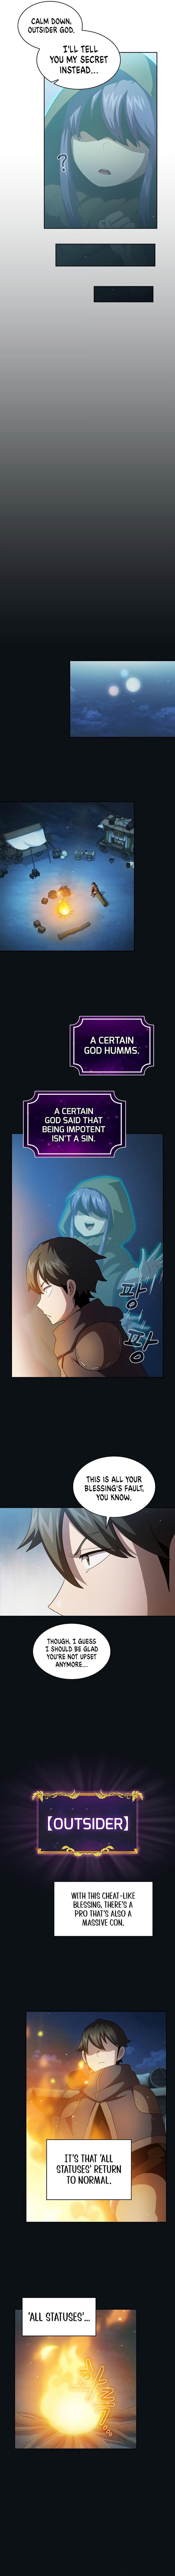 is-this-hero-for-real-chap-28-8